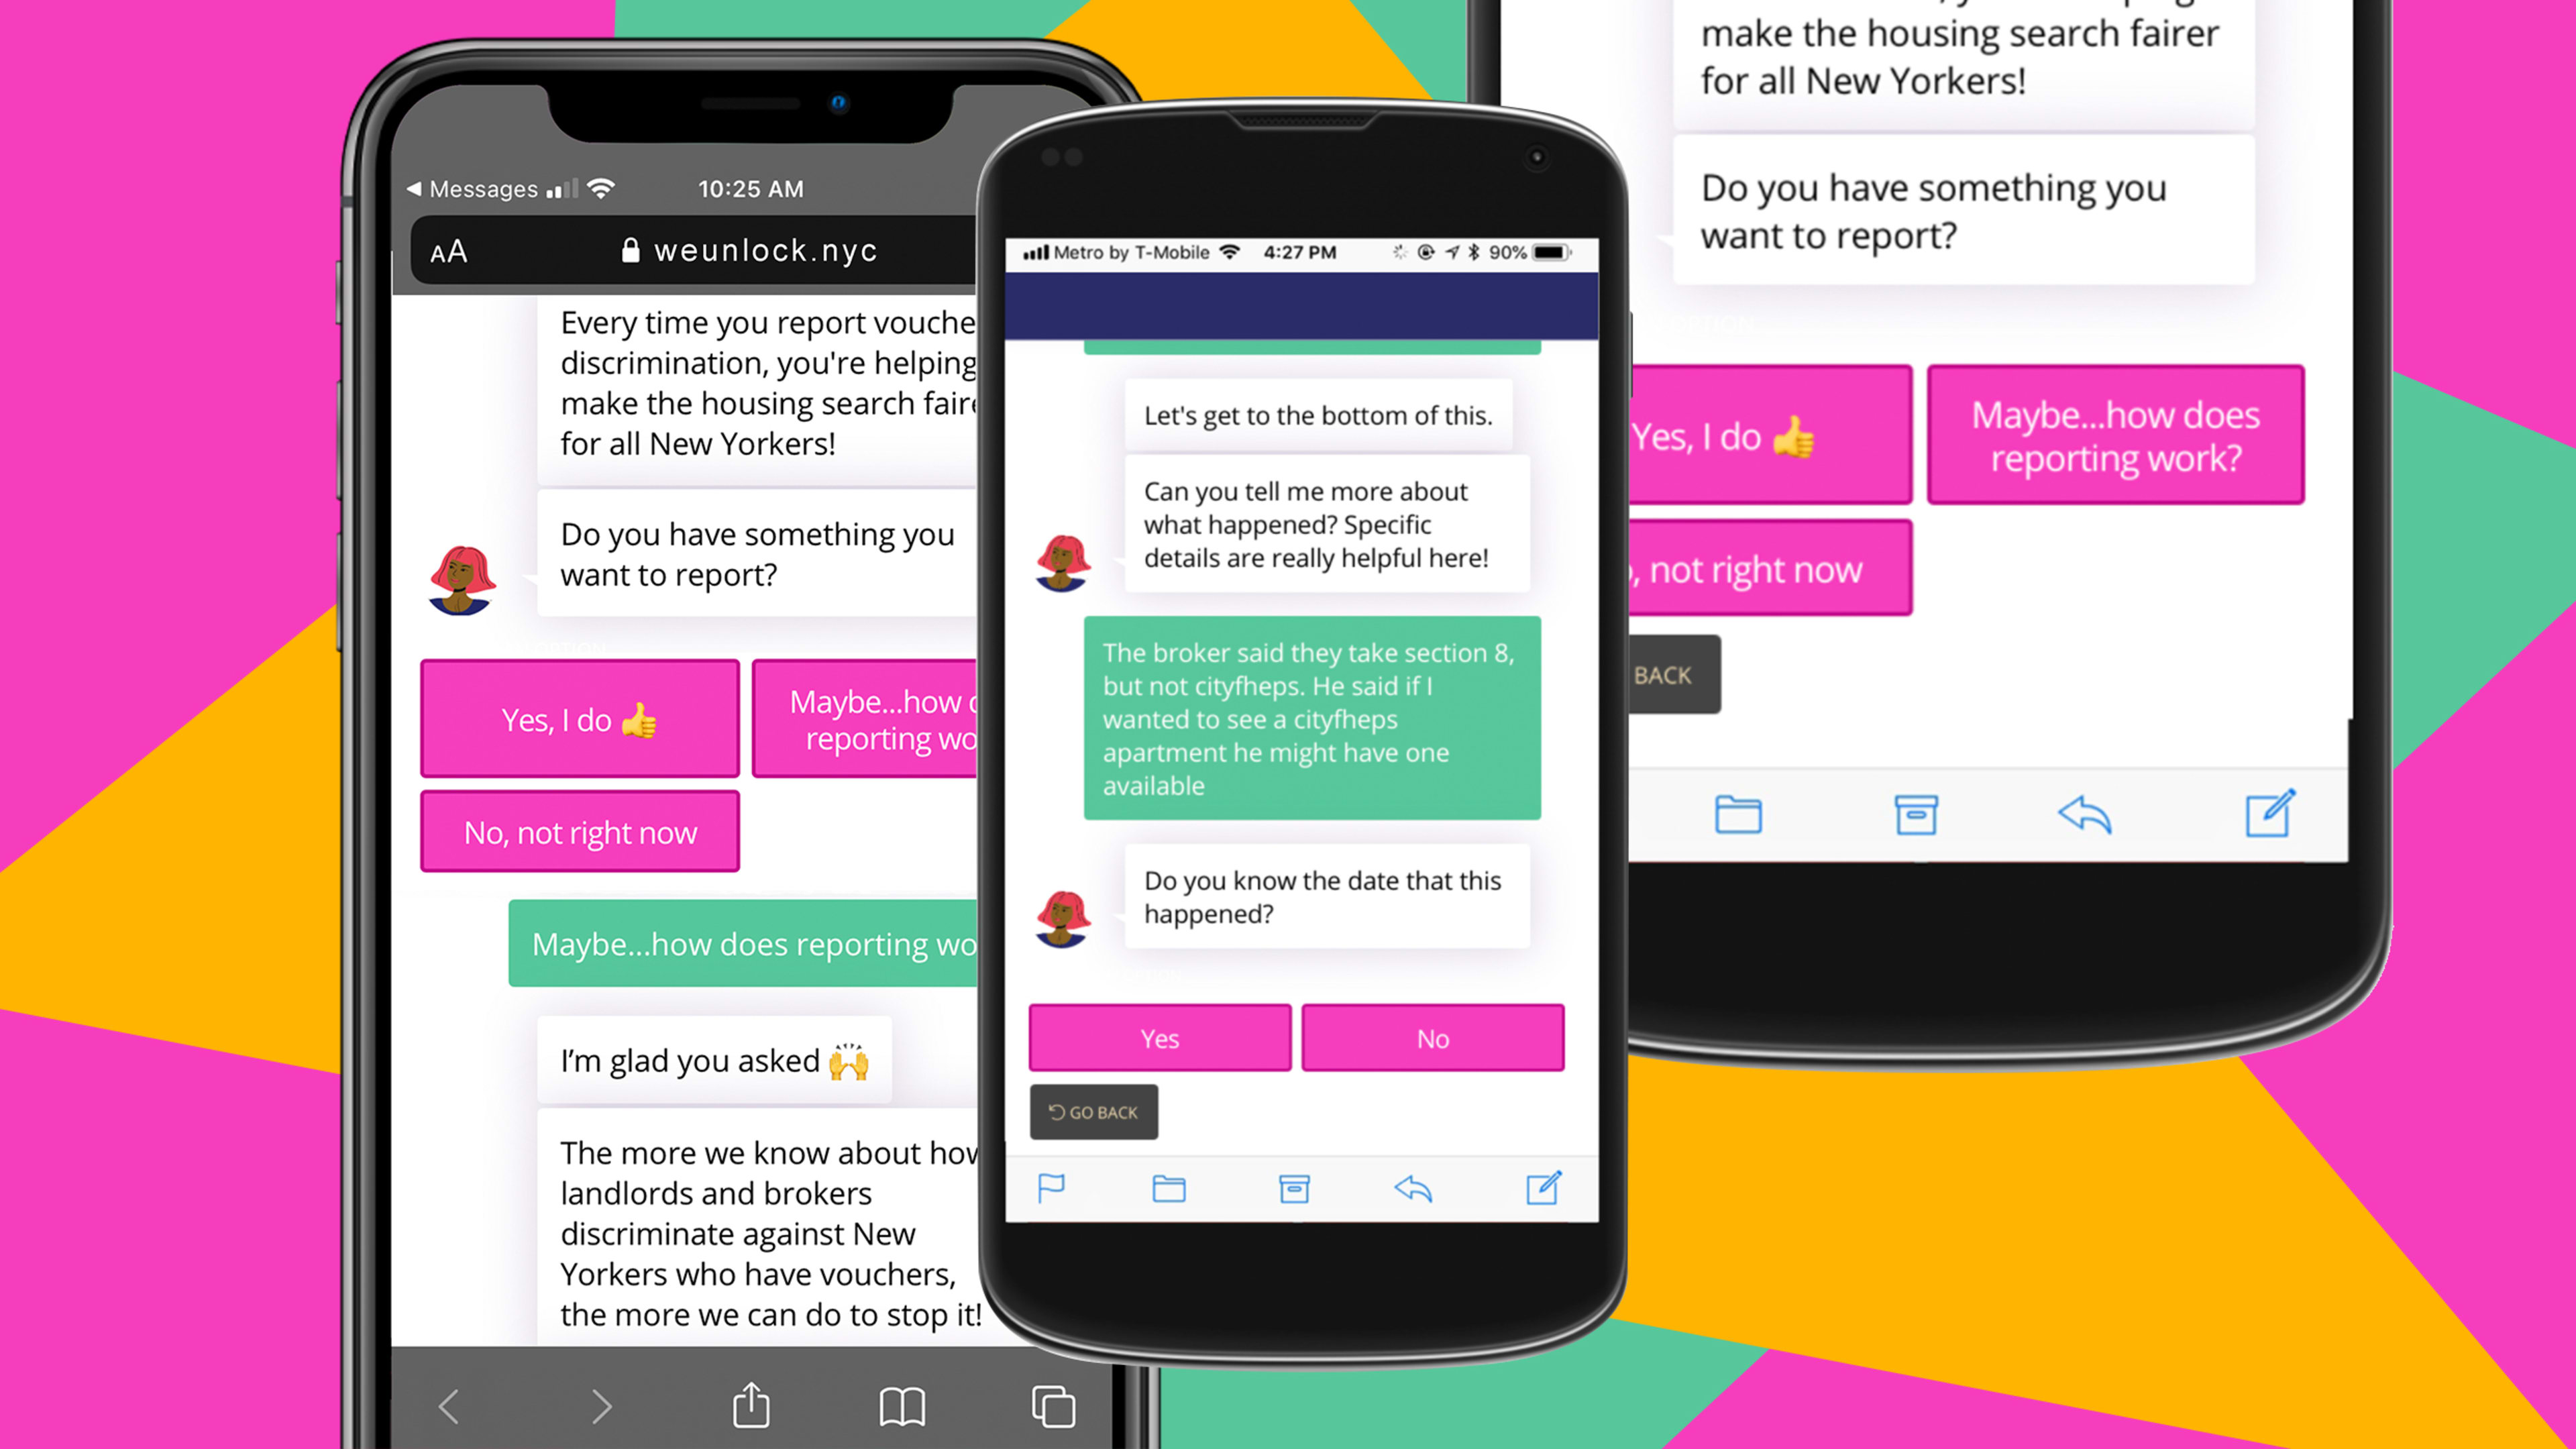 This chatbot helps New Yorkers report housing discrimination